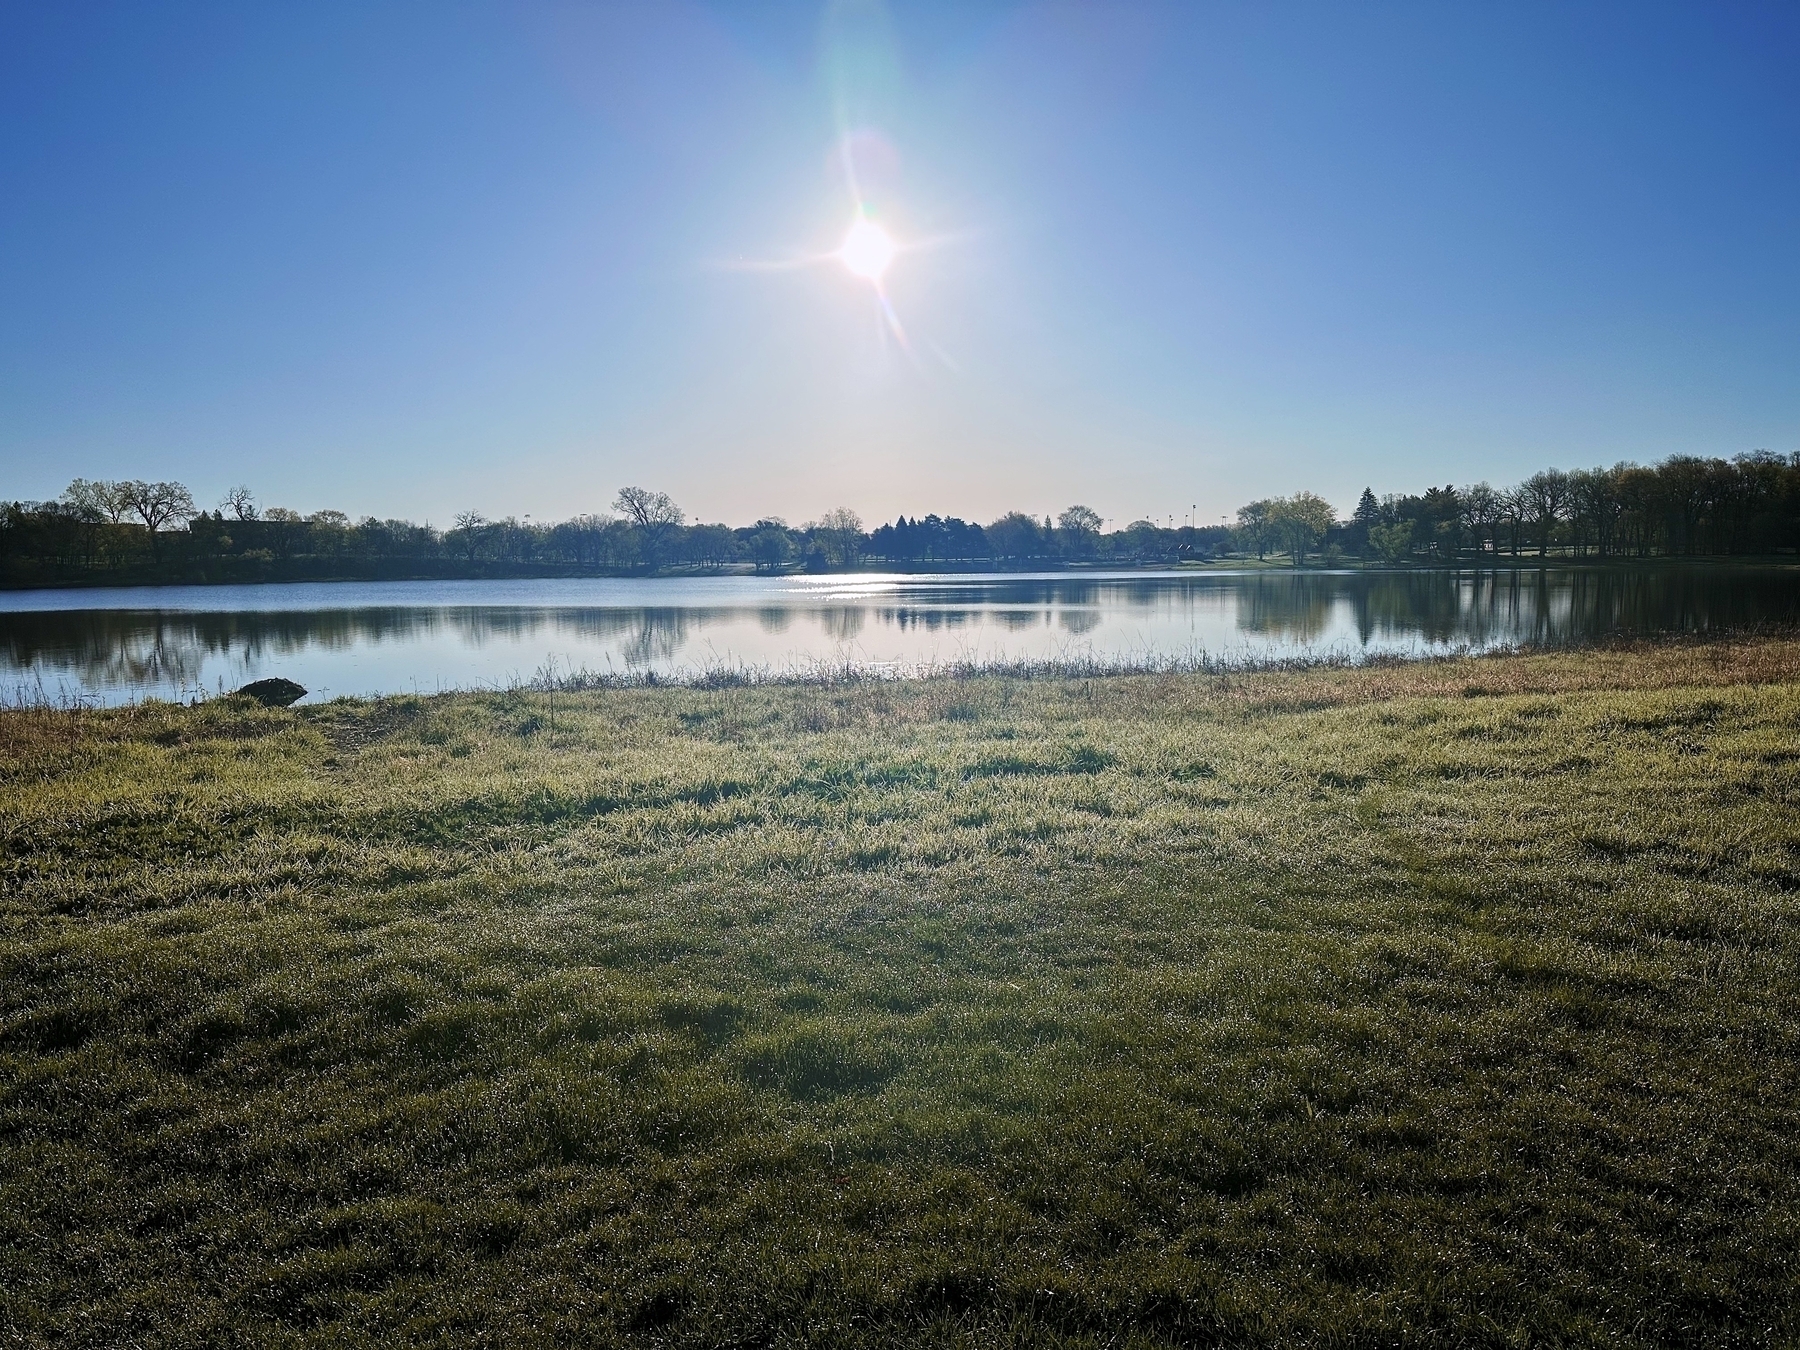 A serene lake reflects the clear sky with the sun shining brightly above; dew-kissed grass in the foreground adds to the tranquil morning ambiance.